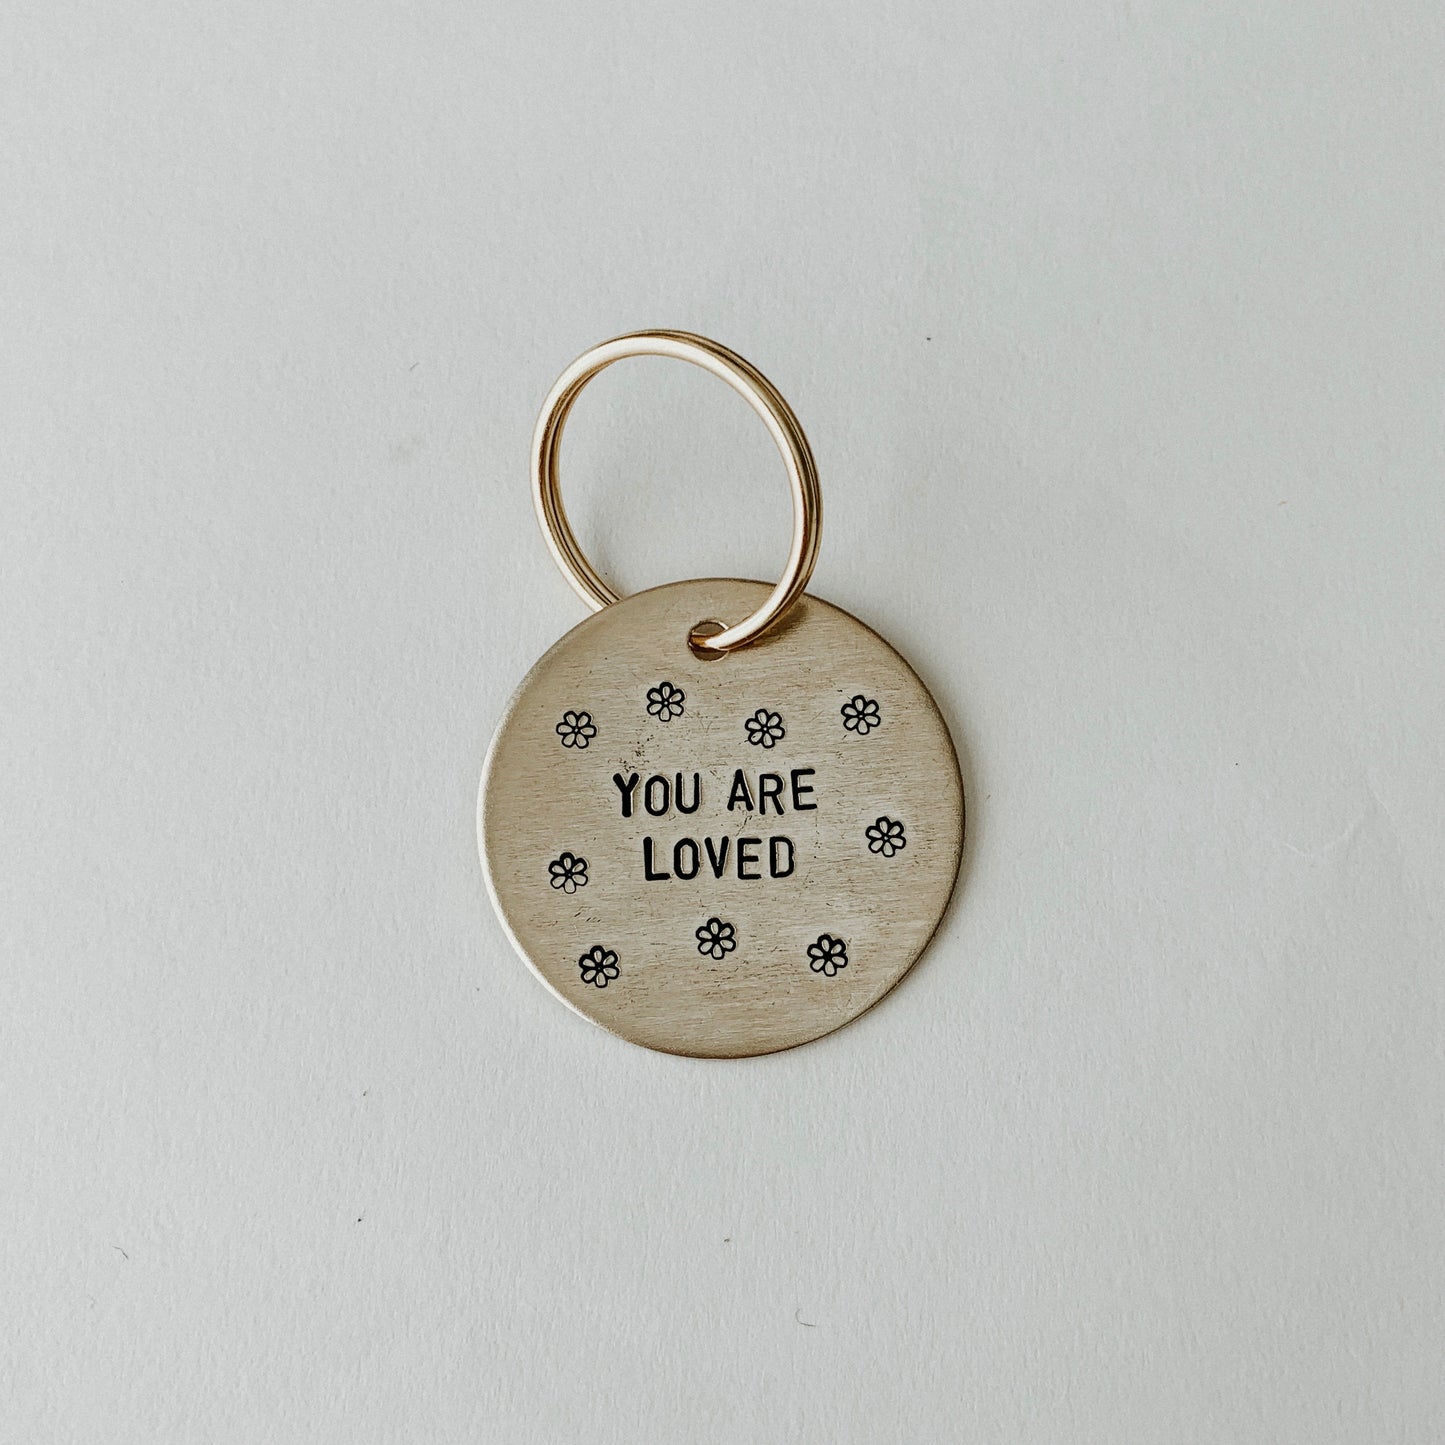 You Are Loved / Large Brass Key Tag